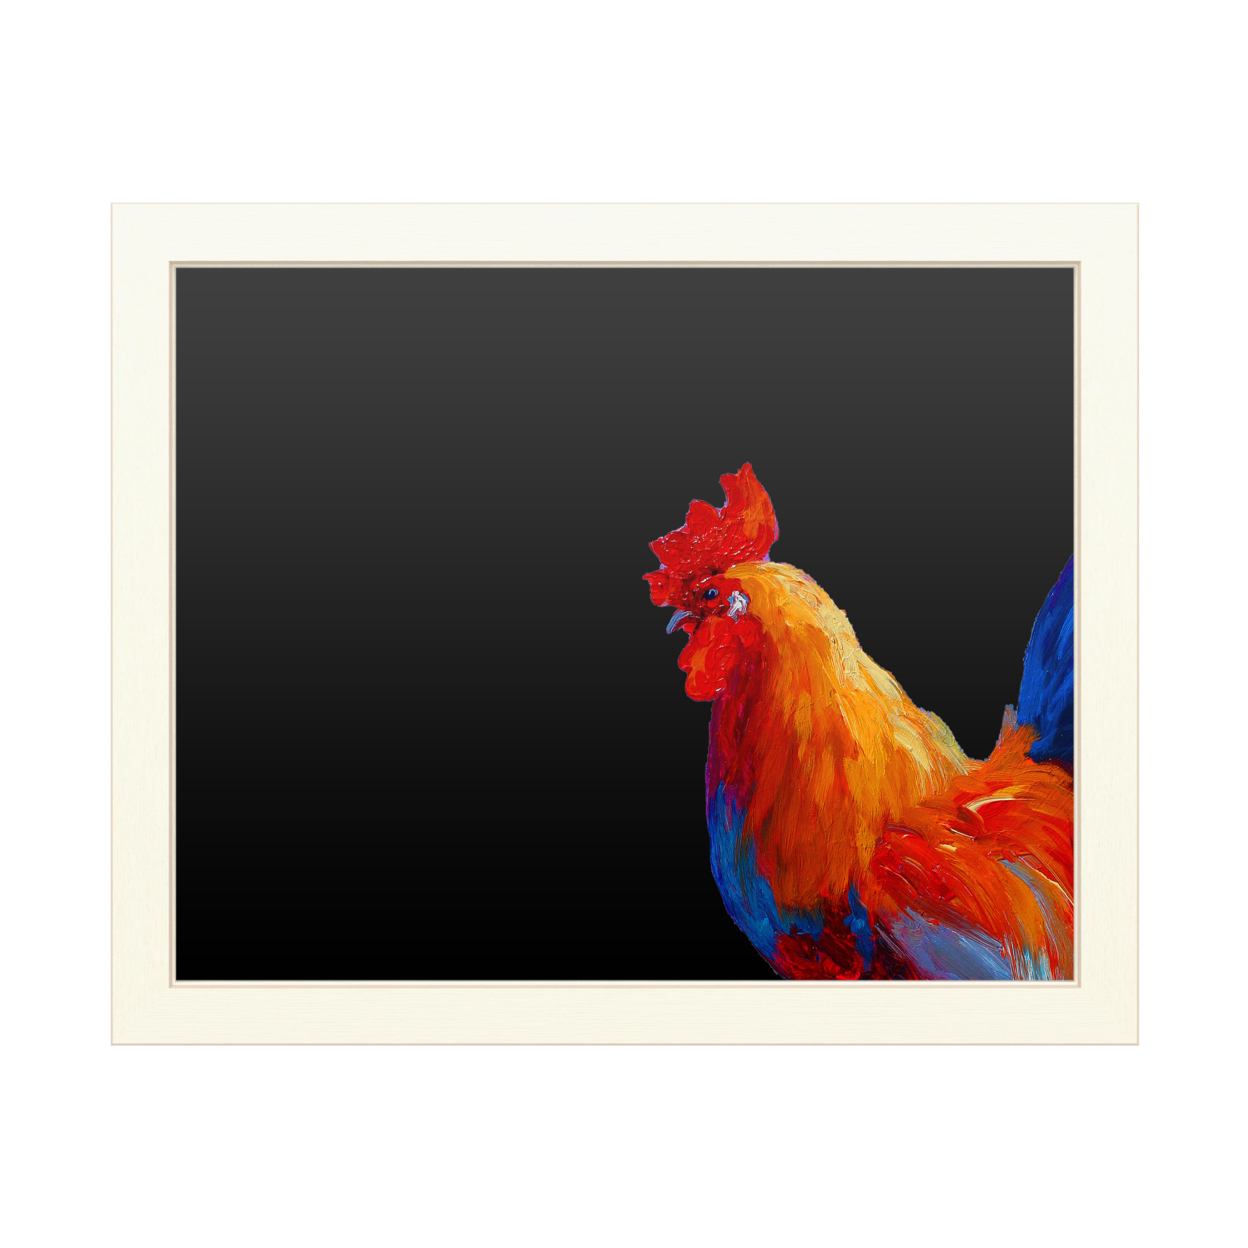 16 X 20 Chalk Board With Printed Artwork - Marion Rose Rooster Bob 1 White Board - Ready To Hang Chalkboard